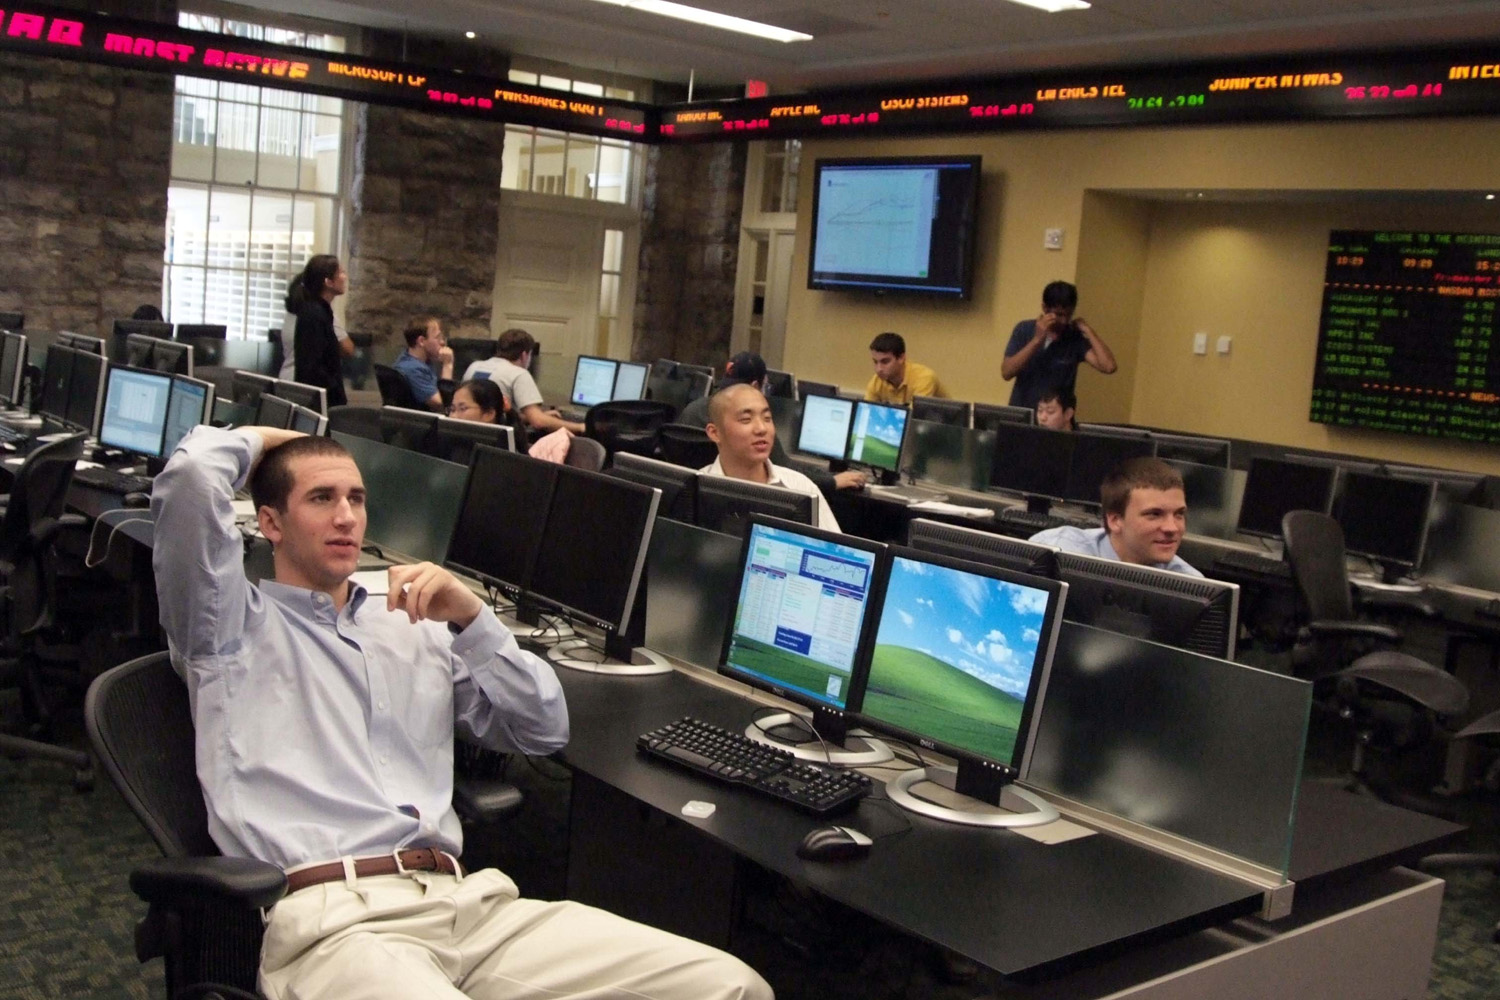 Andrew Cook, Sihyun Choi, and Chris Miller watch the stock market